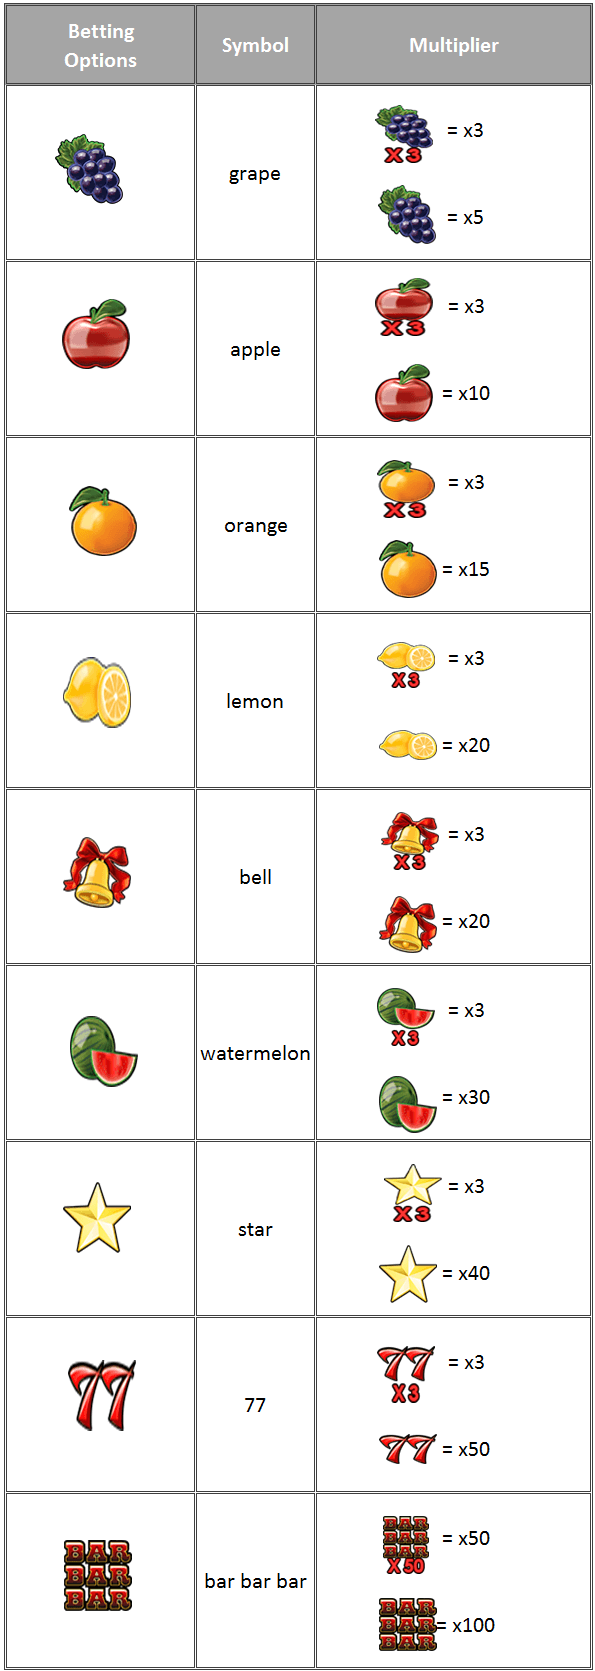 Fruity Fruits betting options and payout.png